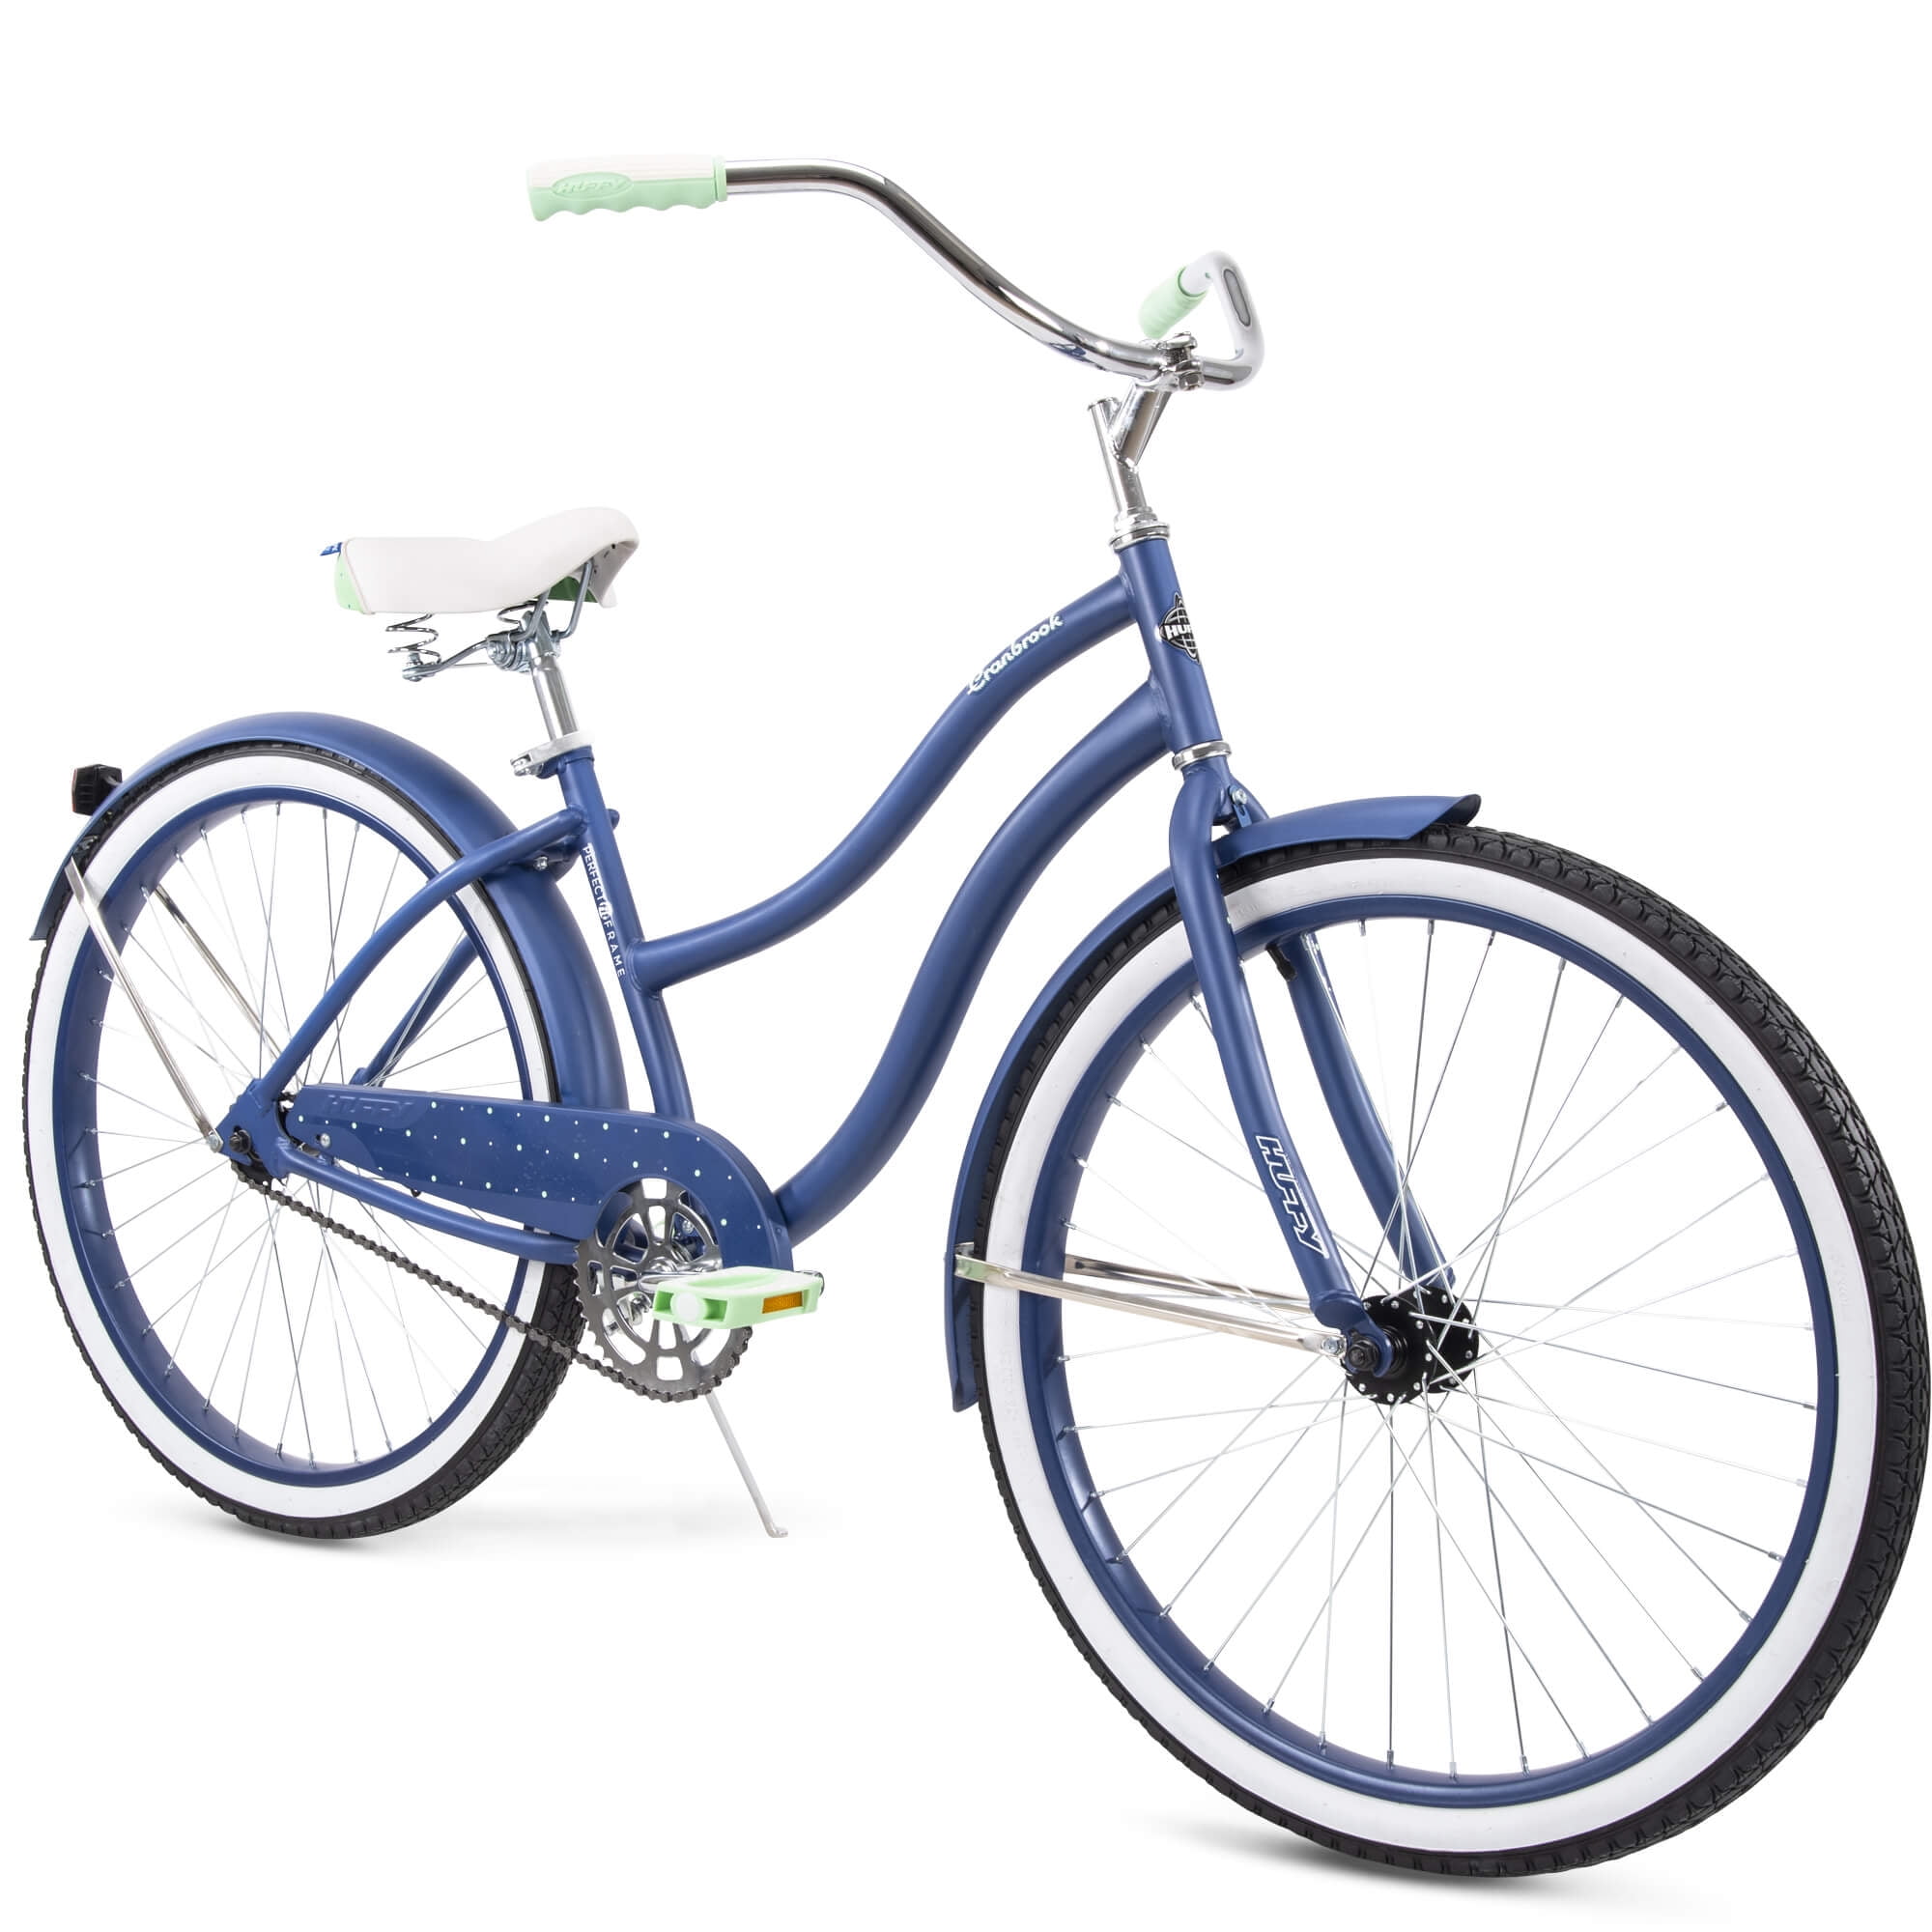 Huffy 26" Cranbrook Women's Cruiser Bike with Perfect Fit Frame white blue 